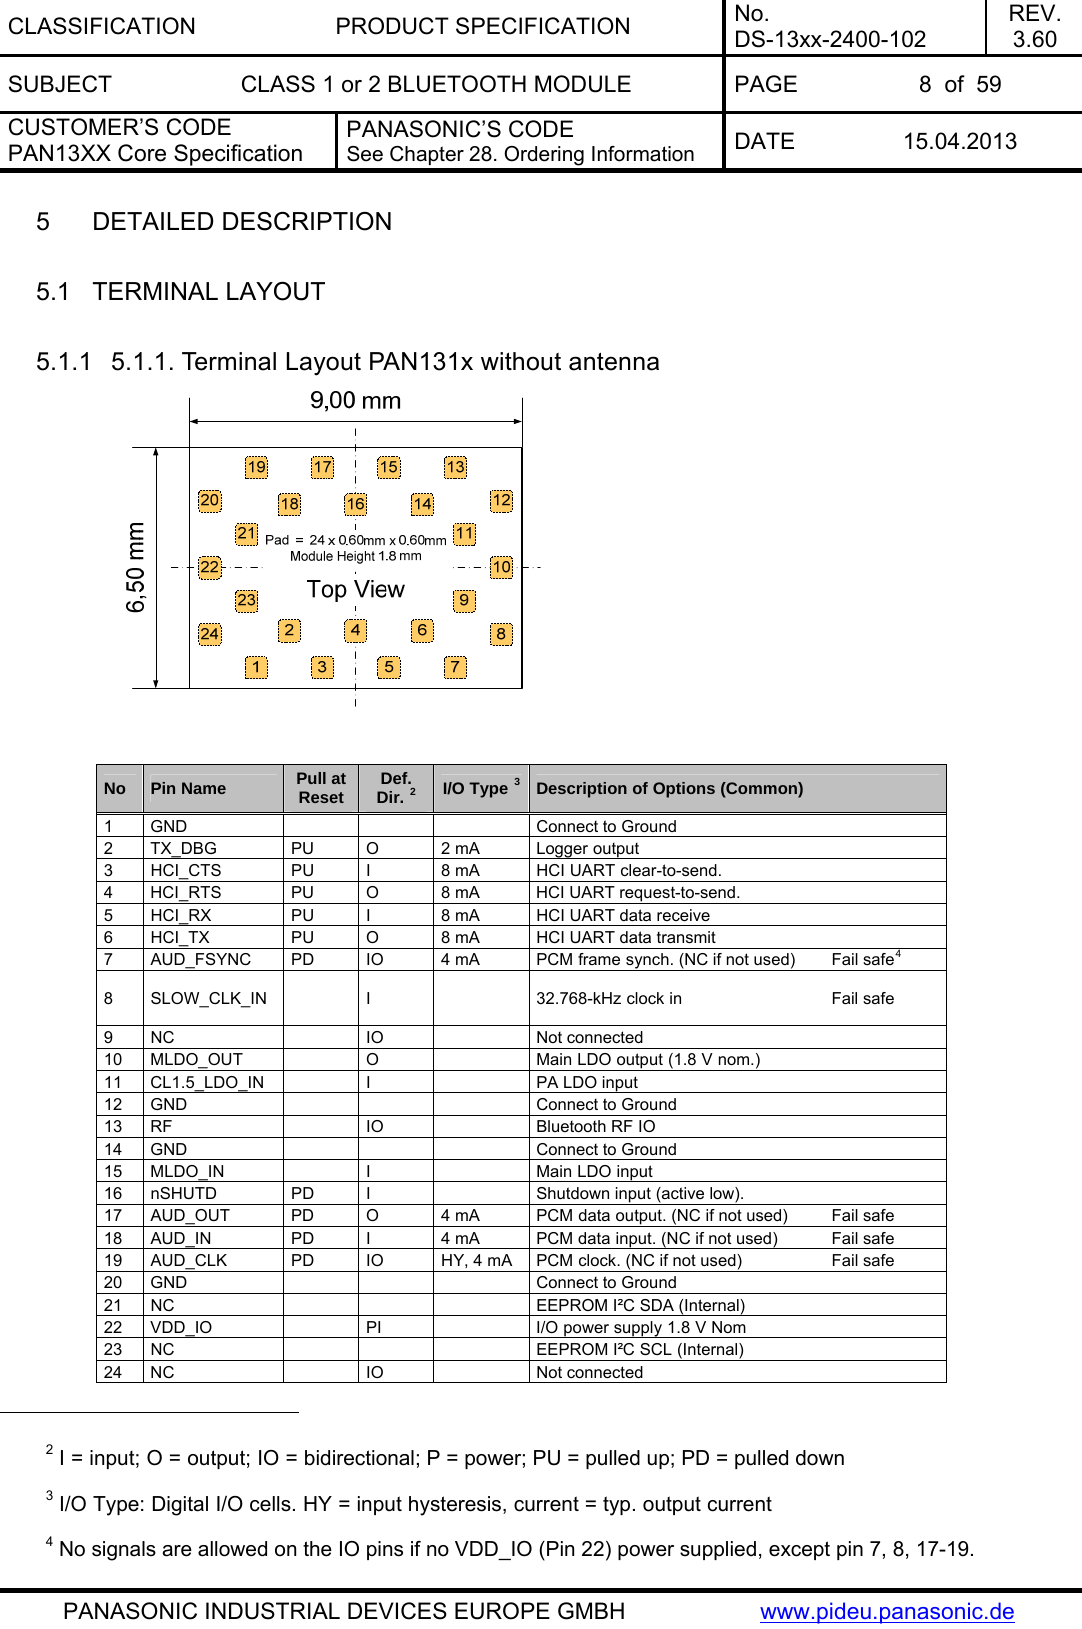 CLASSIFICATION PRODUCT SPECIFICATION No. DS-13xx-2400-102 REV. 3.60 SUBJECT  CLASS 1 or 2 BLUETOOTH MODULE  PAGE  8  of  59 CUSTOMER’S CODE PAN13XX Core Specification PANASONIC’S CODE See Chapter 28. Ordering Information  DATE 15.04.2013   PANASONIC INDUSTRIAL DEVICES EUROPE GMBH  www.pideu.panasonic.de 5  DETAILED DESCRIPTION  5.1  TERMINAL LAYOUT  5.1.1  5.1.1. Terminal Layout PAN131x without antenna      No  Pin Name  Pull at Reset  Def. Dir. 2 I/O Type 3Description of Options (Common) 1 GND      Connect to Ground 2 TX_DBG  PU  O  2 mA  Logger output 3  HCI_CTS  PU  I  8 mA  HCI UART clear-to-send. 4  HCI_RTS  PU  O  8 mA  HCI UART request-to-send. 5  HCI_RX  PU  I  8 mA  HCI UART data receive 6  HCI_TX  PU  O  8 mA  HCI UART data transmit 7  AUD_FSYNC  PD  IO  4 mA  PCM frame synch. (NC if not used)      Fail safe4 8  SLOW_CLK_IN    I    32.768-kHz clock in                 Fail safe 9 NC    IO    Not connected 10  MLDO_OUT    O    Main LDO output (1.8 V nom.) 11  CL1.5_LDO_IN    I    PA LDO input 12 GND      Connect to Ground 13  RF    IO    Bluetooth RF IO 14 GND      Connect to Ground 15  MLDO_IN    I    Main LDO input 16  nSHUTD  PD  I    Shutdown input (active low). 17  AUD_OUT  PD  O  4 mA  PCM data output. (NC if not used)        Fail safe 18  AUD_IN  PD  I  4 mA  PCM data input. (NC if not used)         Fail safe 19  AUD_CLK  PD  IO  HY, 4 mA  PCM clock. (NC if not used)                 Fail safe 20 GND      Connect to Ground 21  NC        EEPROM I²C SDA (Internal) 22  VDD_IO    PI    I/O power supply 1.8 V Nom 23 NC      EEPROM I²C SCL (Internal) 24 NC    IO    Not connected                                                  2 I = input; O = output; IO = bidirectional; P = power; PU = pulled up; PD = pulled down 3 I/O Type: Digital I/O cells. HY = input hysteresis, current = typ. output current 4 No signals are allowed on the IO pins if no VDD_IO (Pin 22) power supplied, except pin 7, 8, 17-19.  